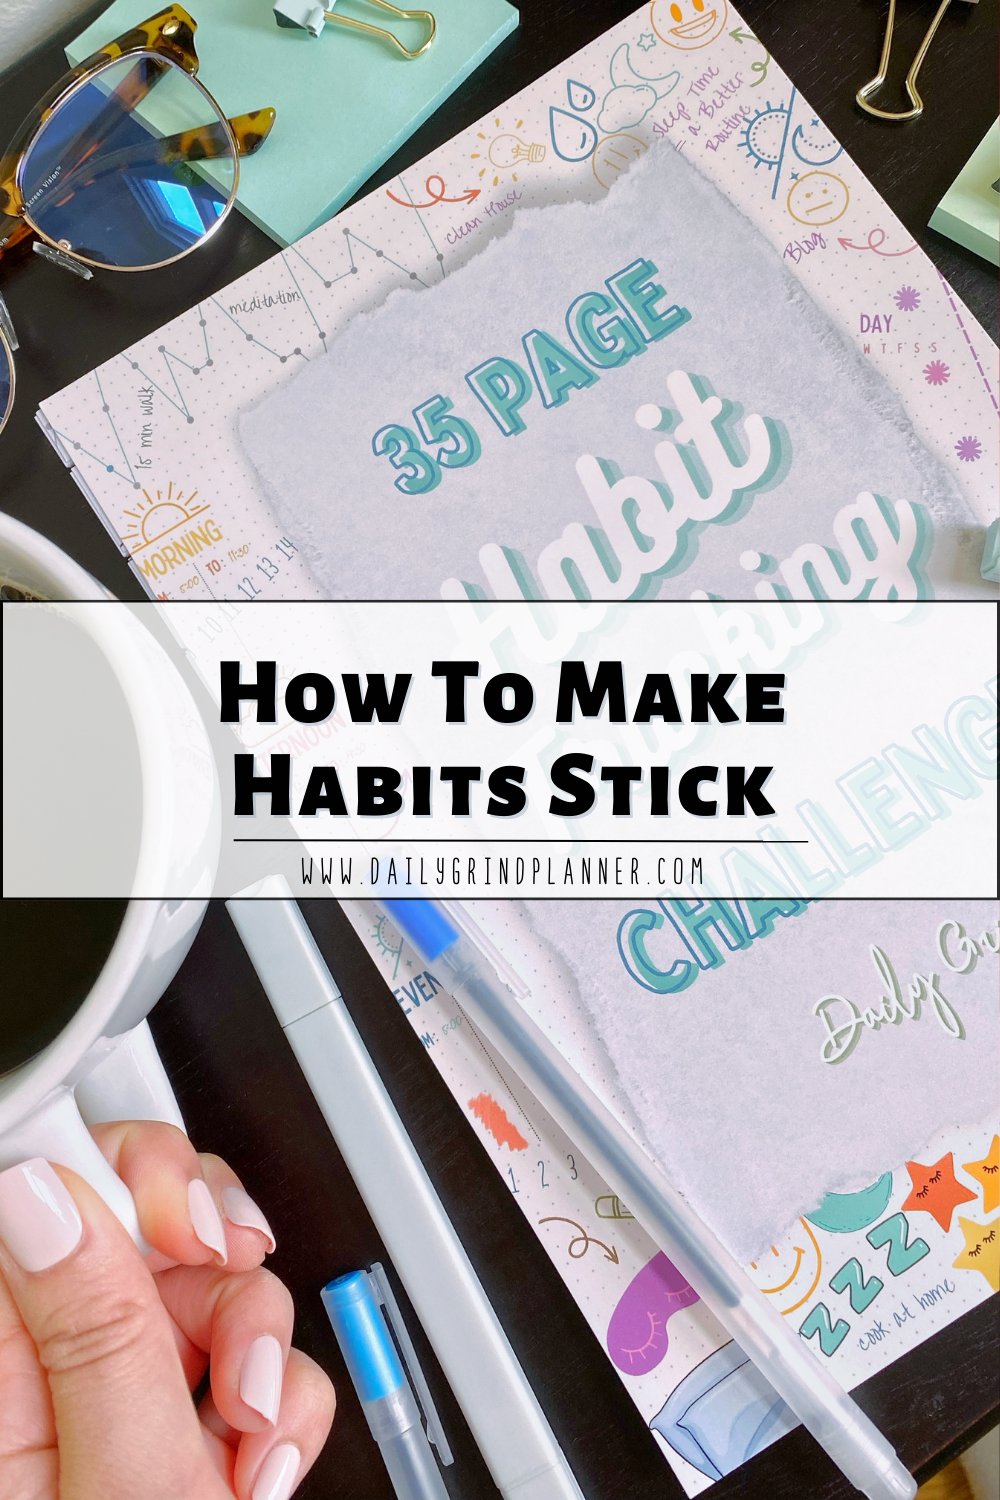 How To Make Habits Stick